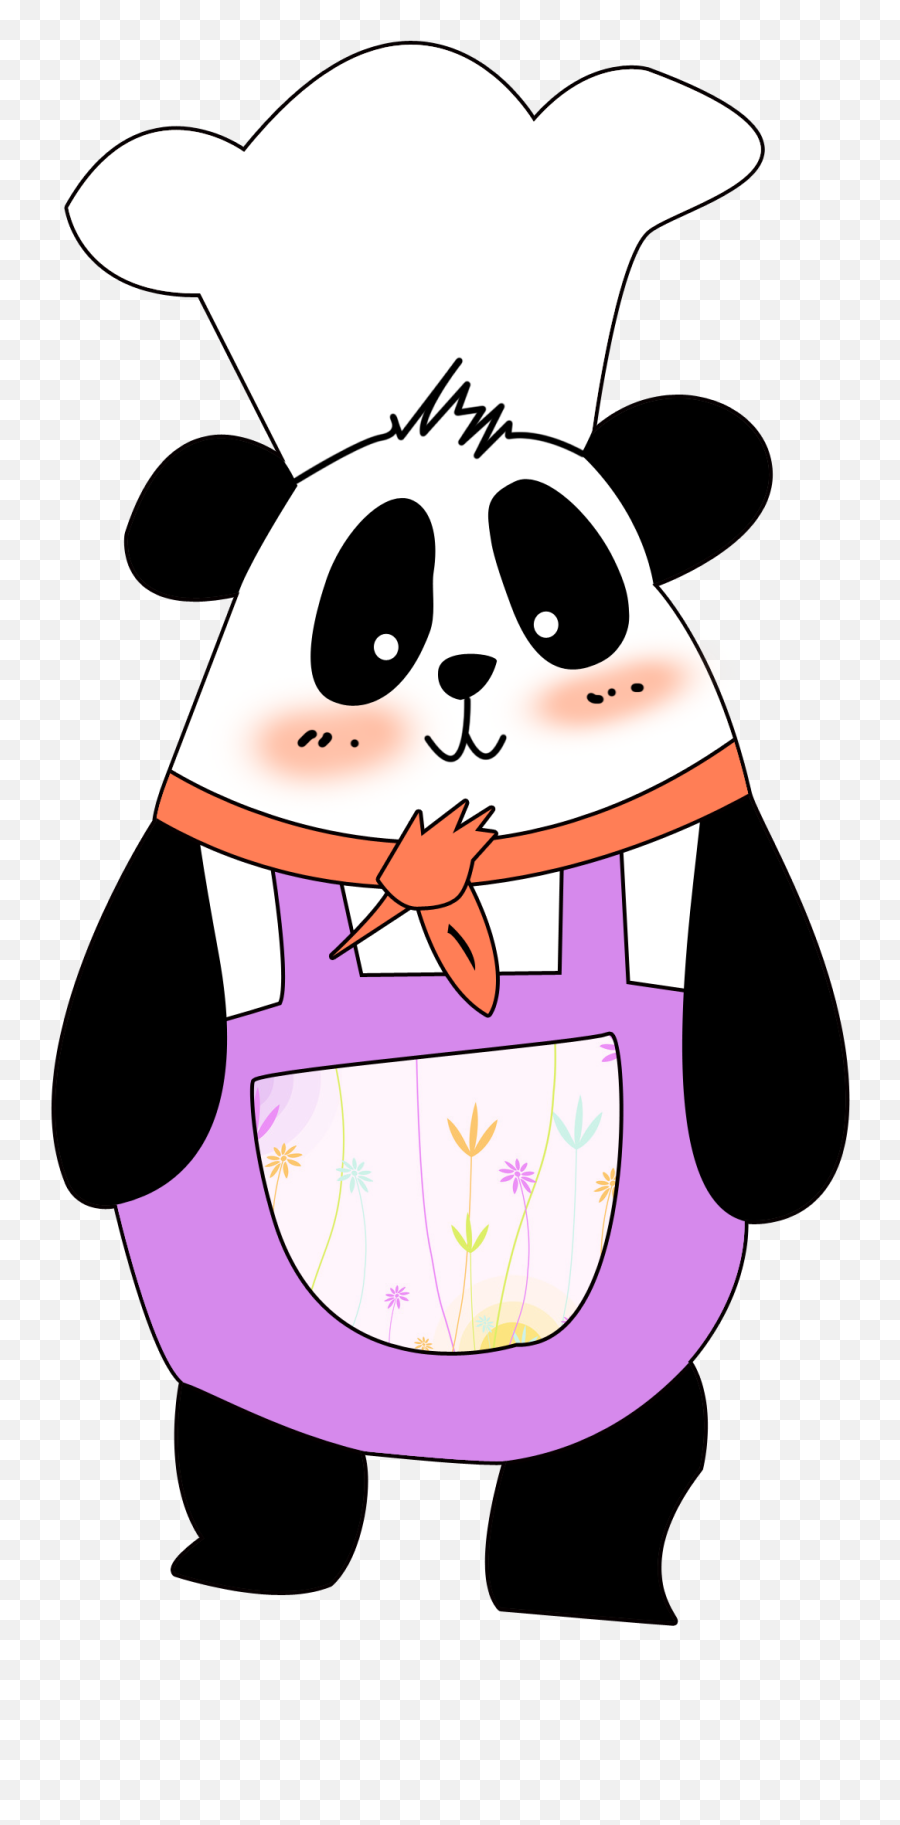 Download Chef Panda Png Image With No Background - Pngkeycom Chef Panda Transparent Png,Panda Transparent Background